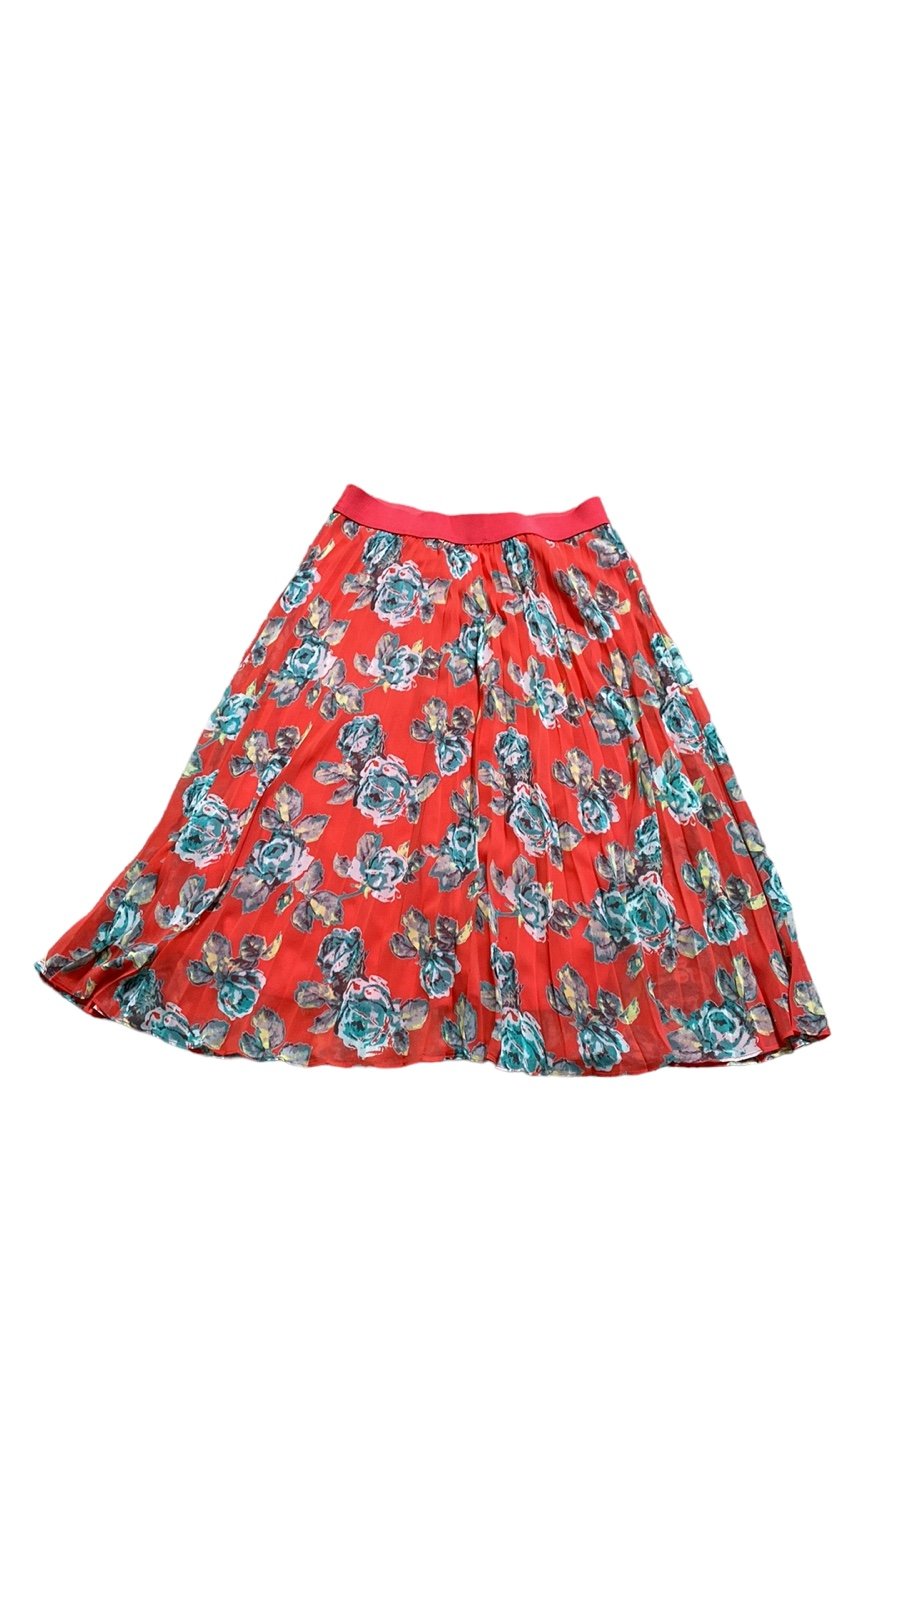 Personality Soprano Red Floral Pleated Midi Skirt oxdNr